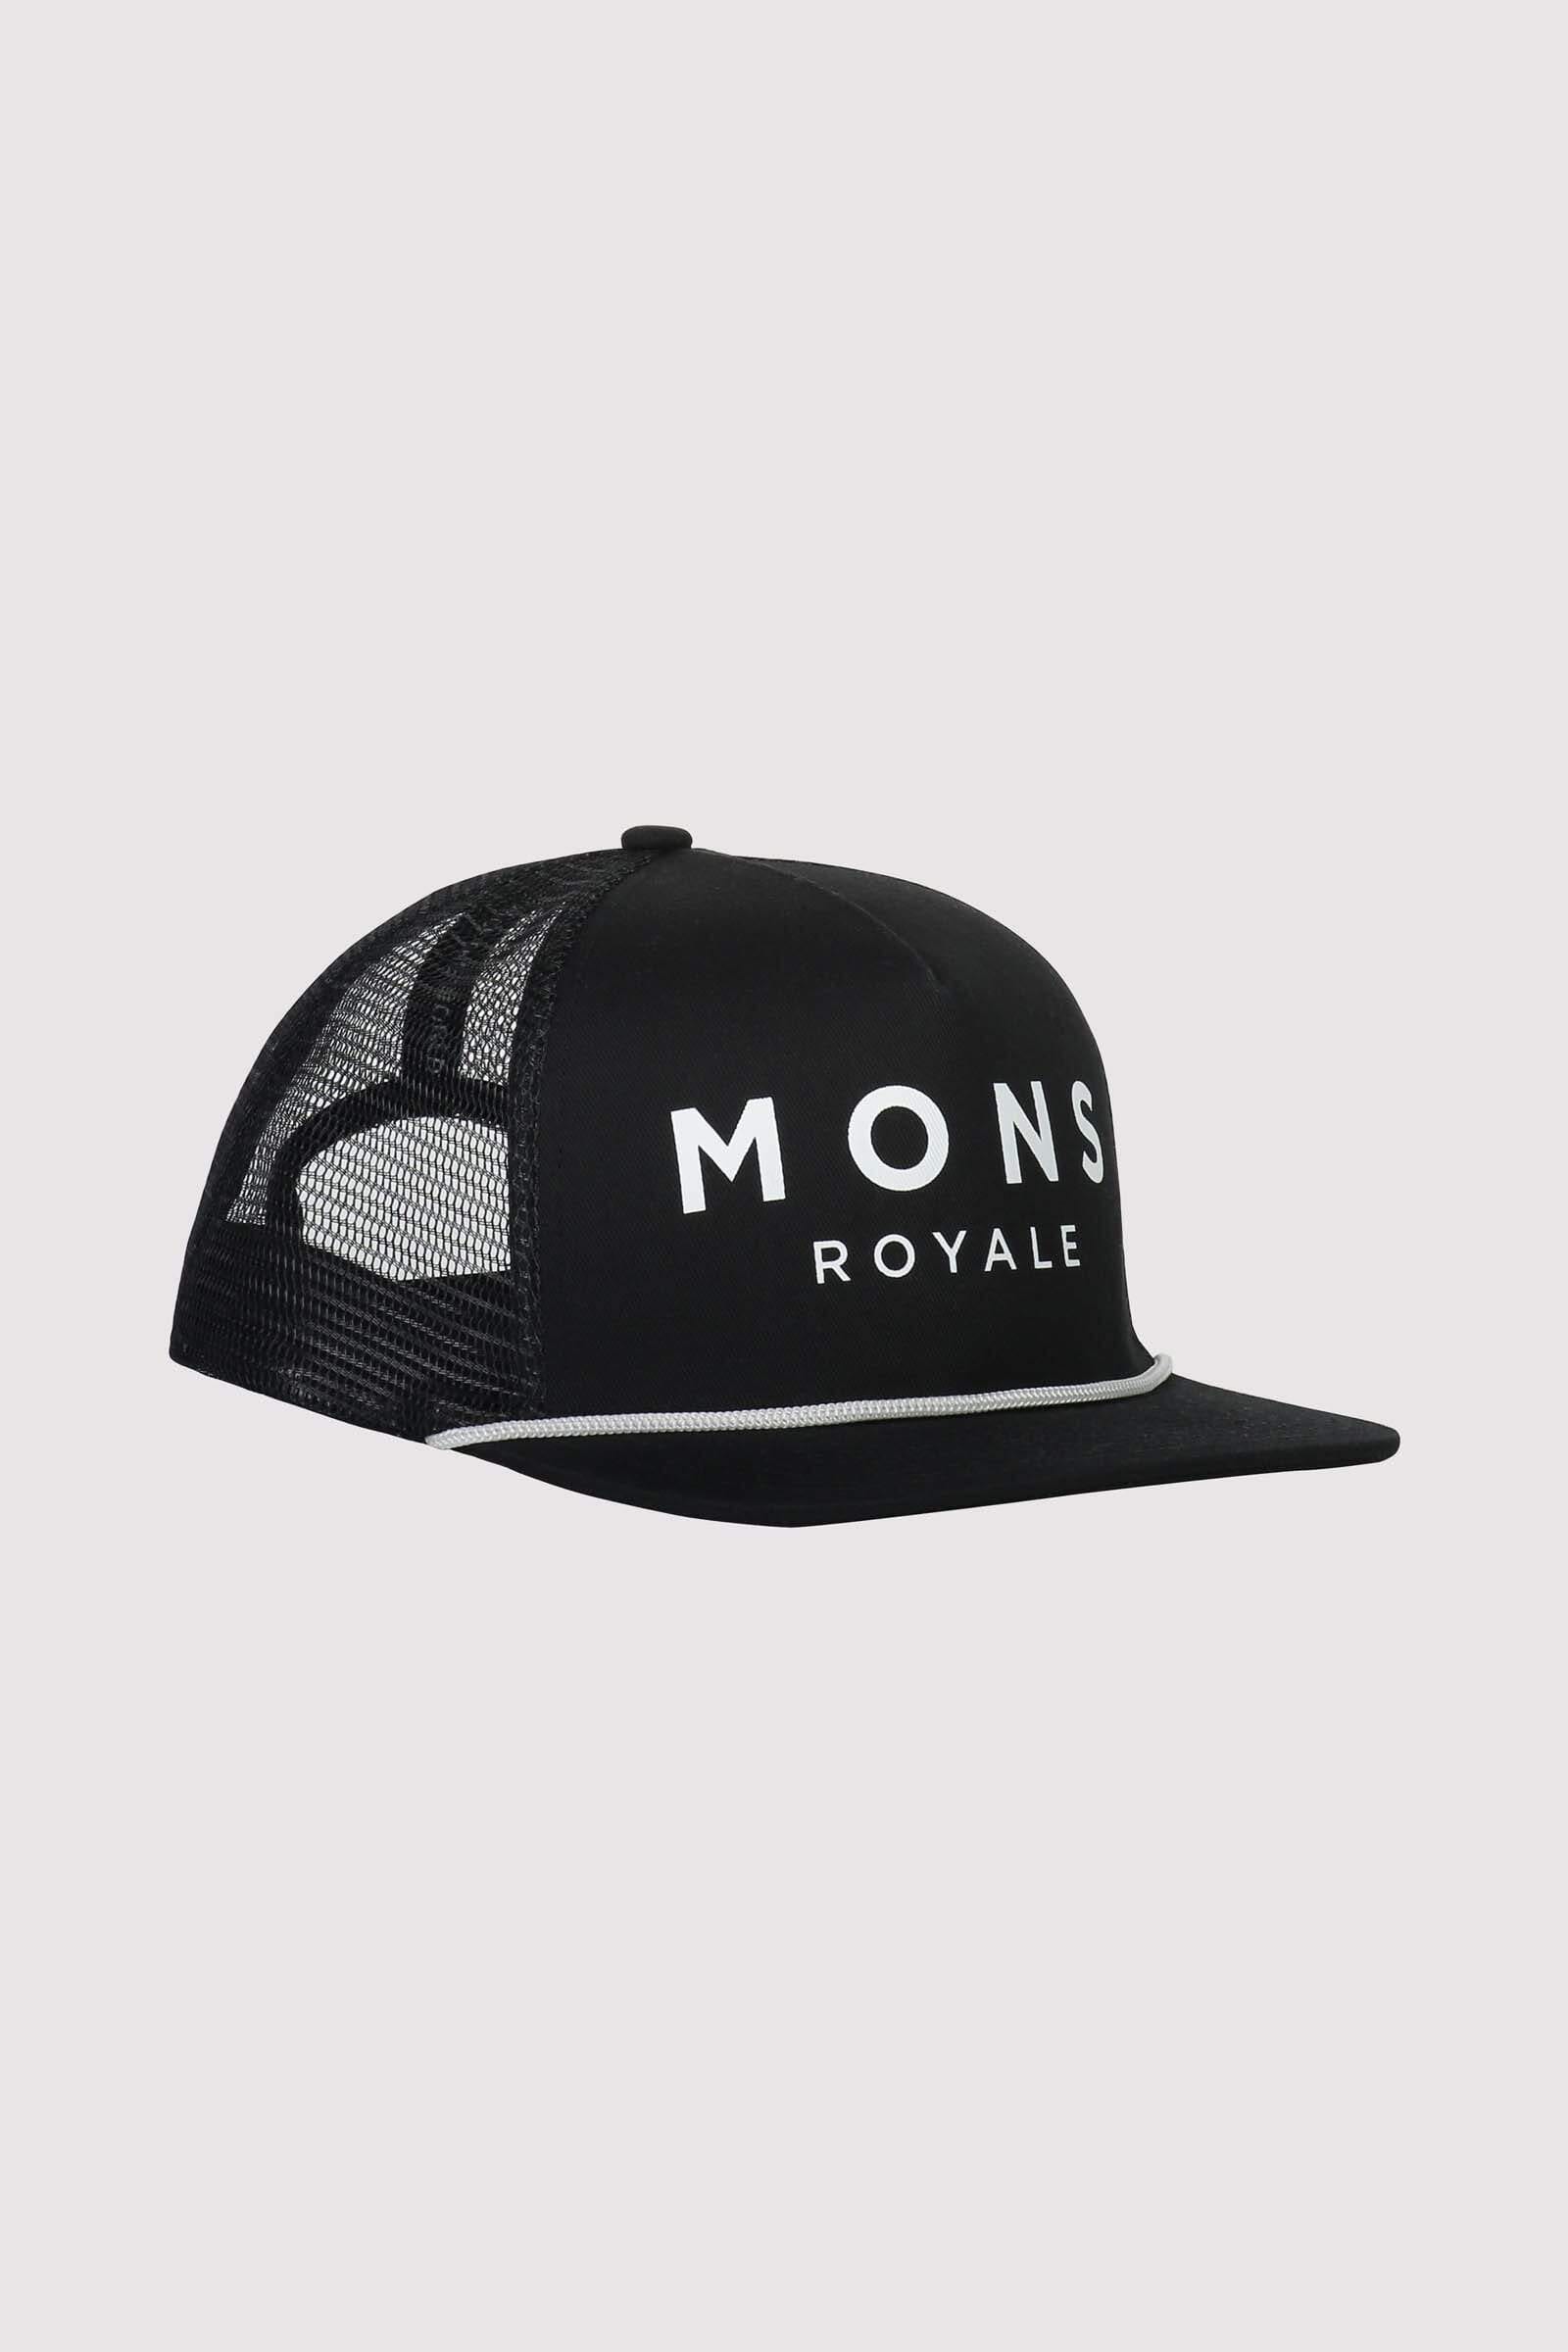 Mons Royale The ACL Trucker Cap